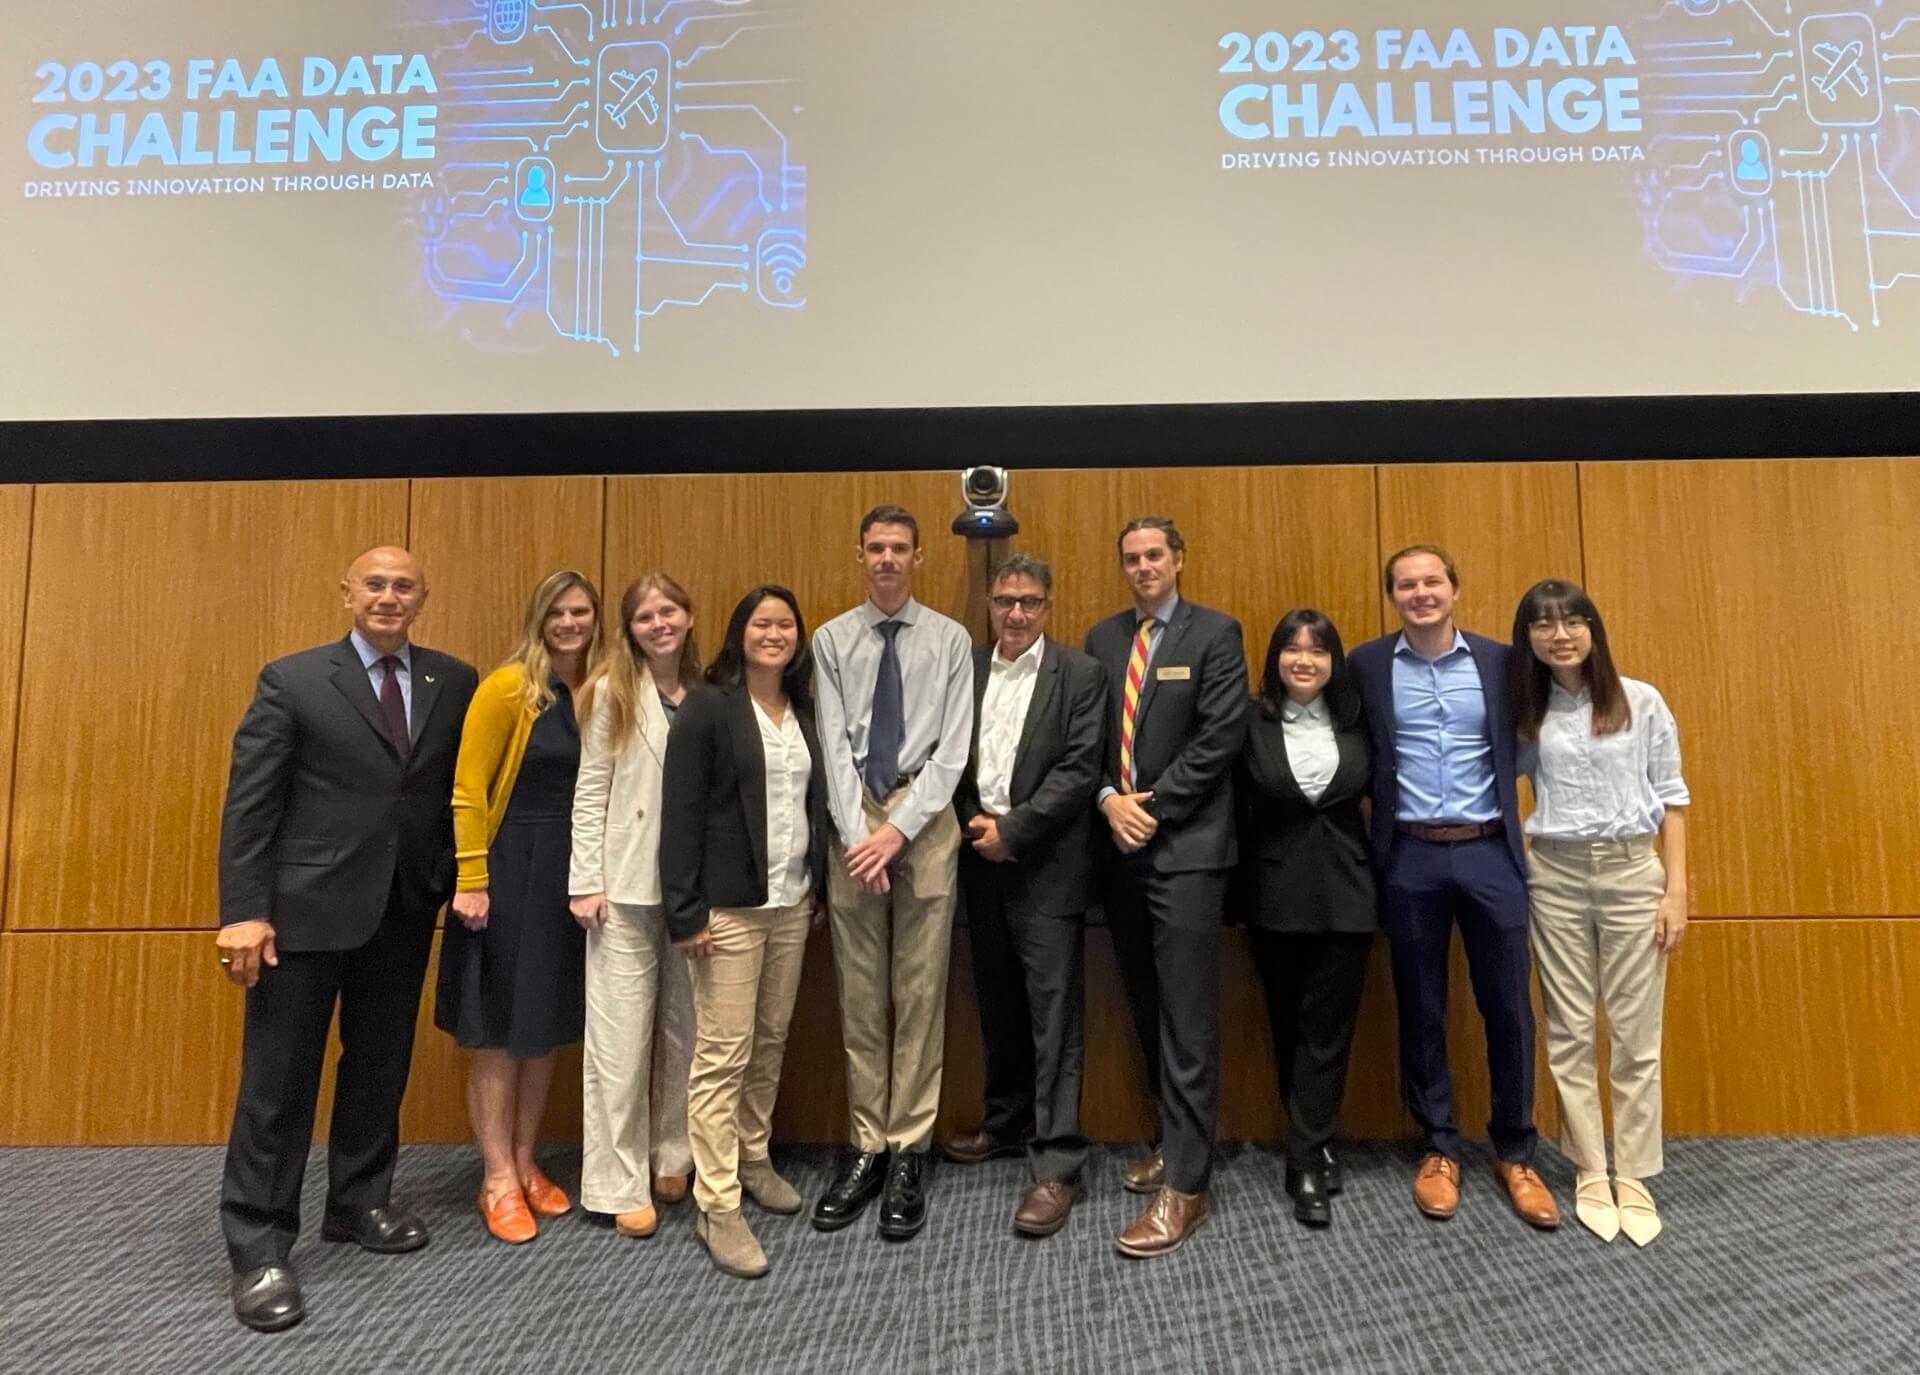 Two USC student teams presented their research at the 2023 FAA Data Challenge in Washington D.C.